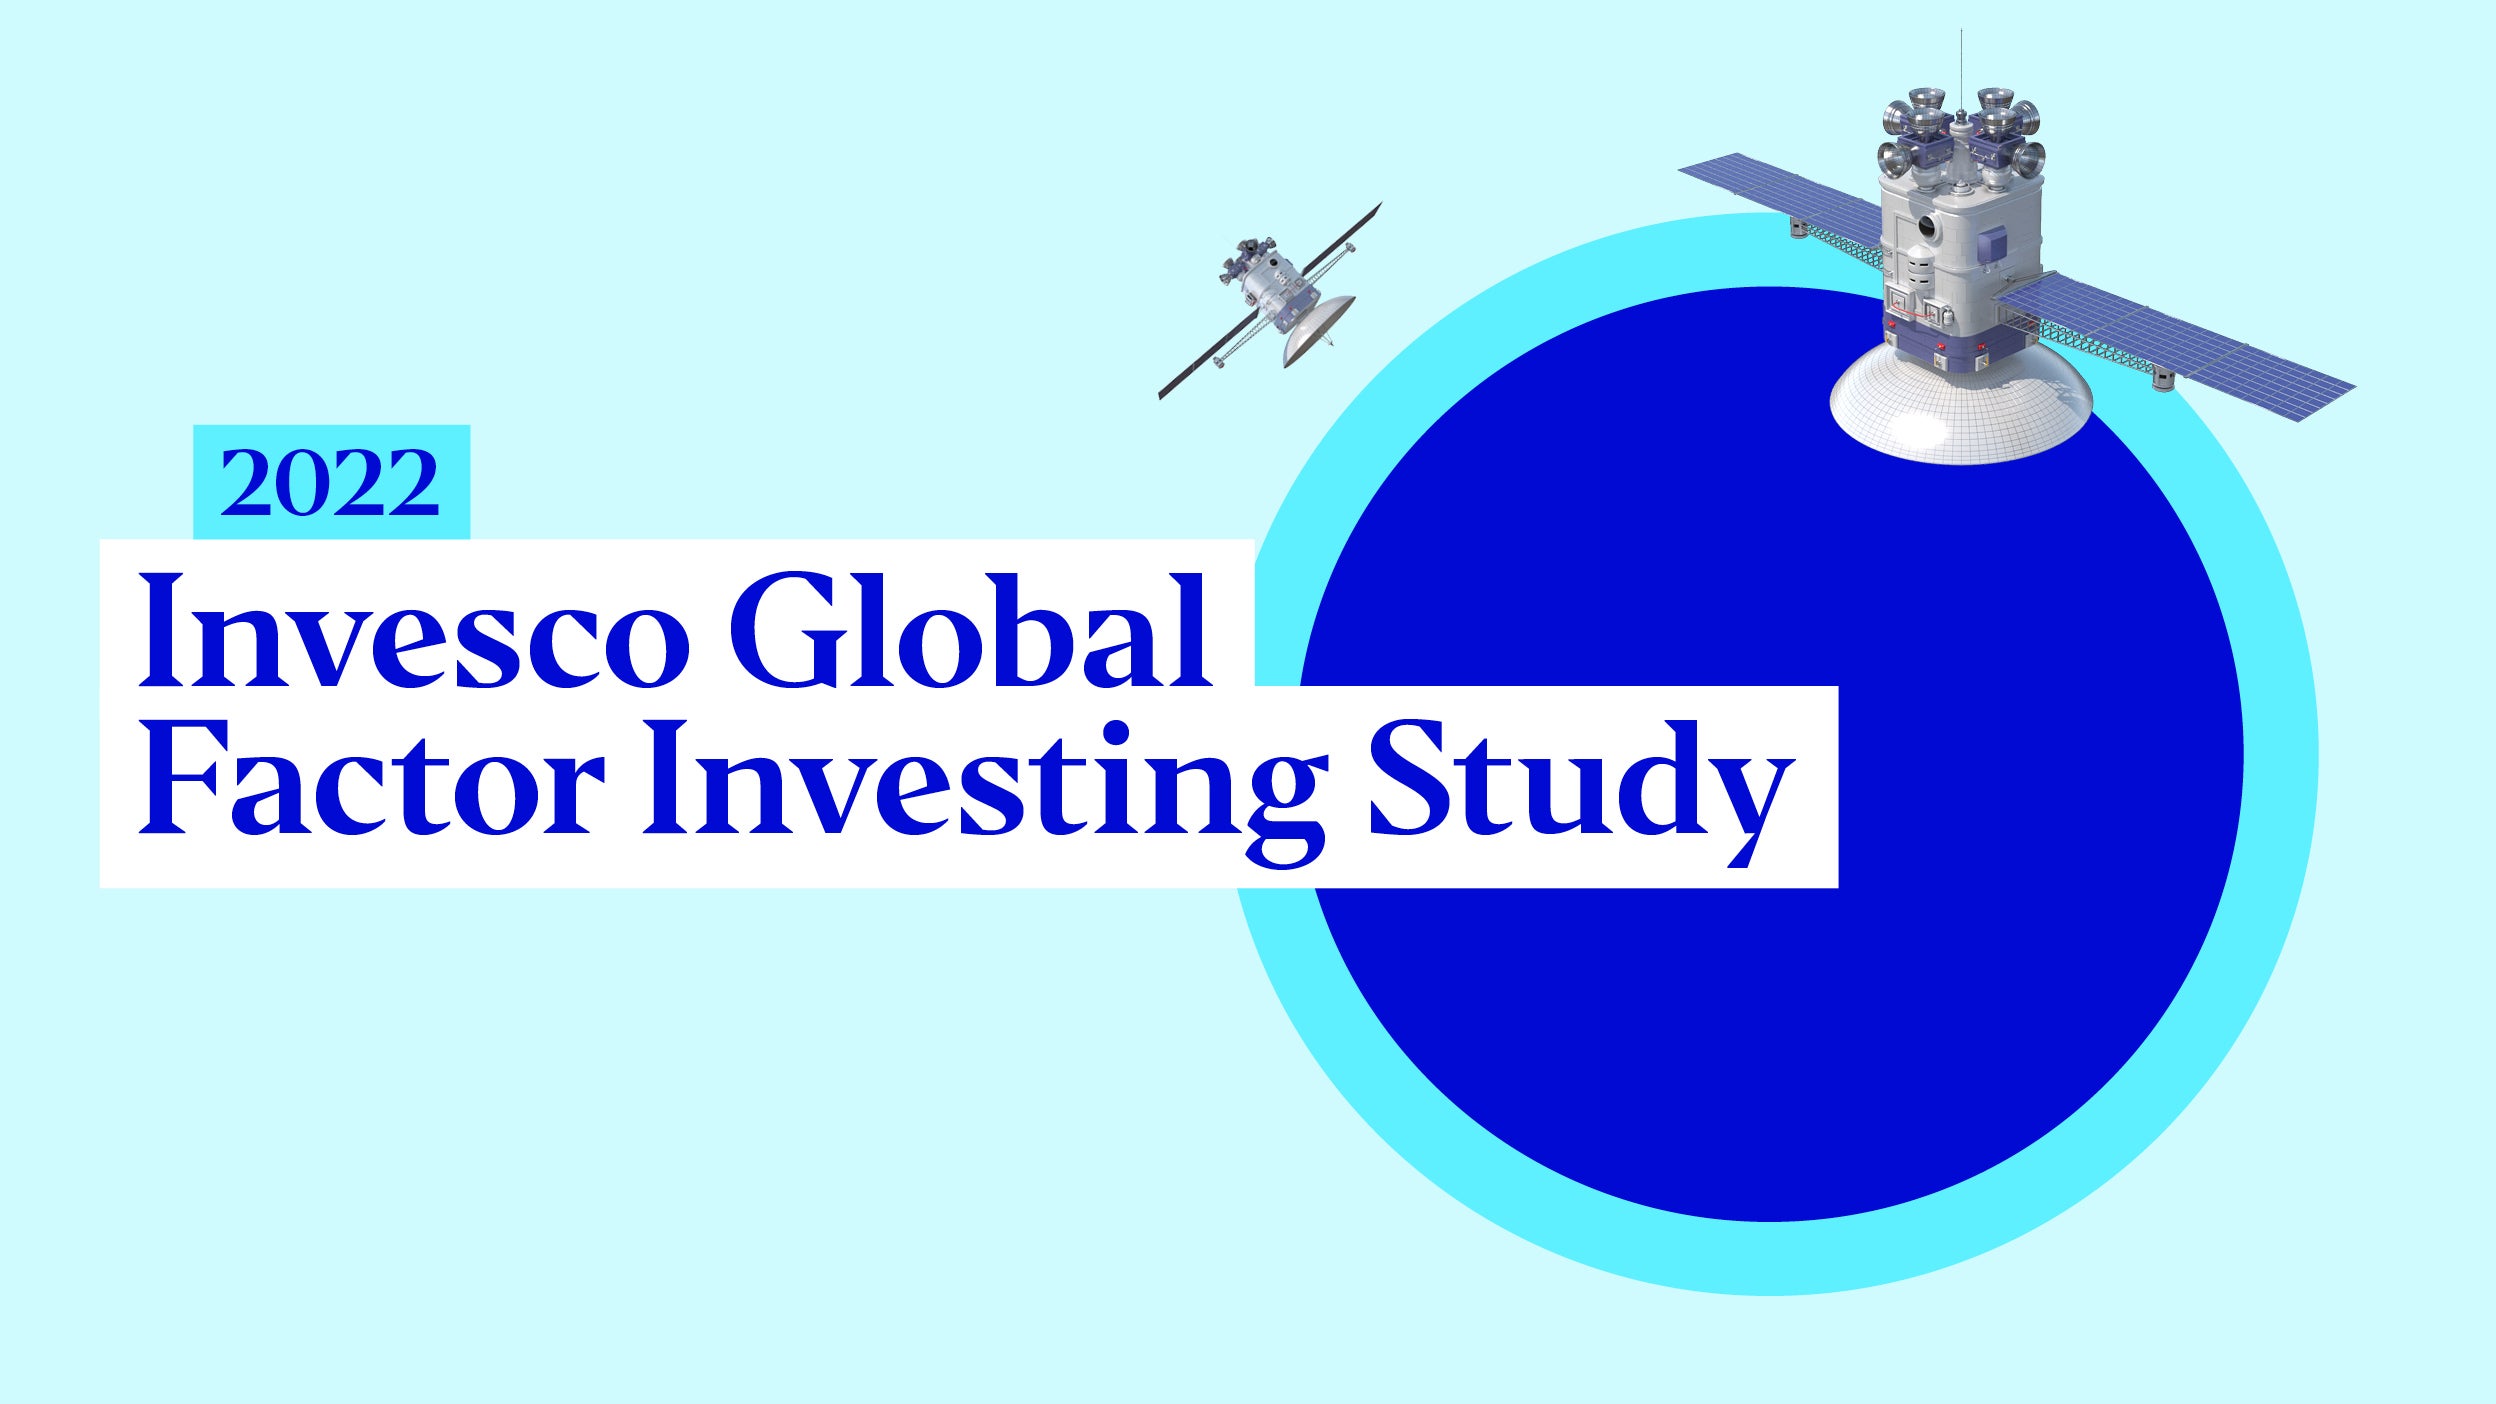 Invesco-Global-Factor-Investing-Study-2022